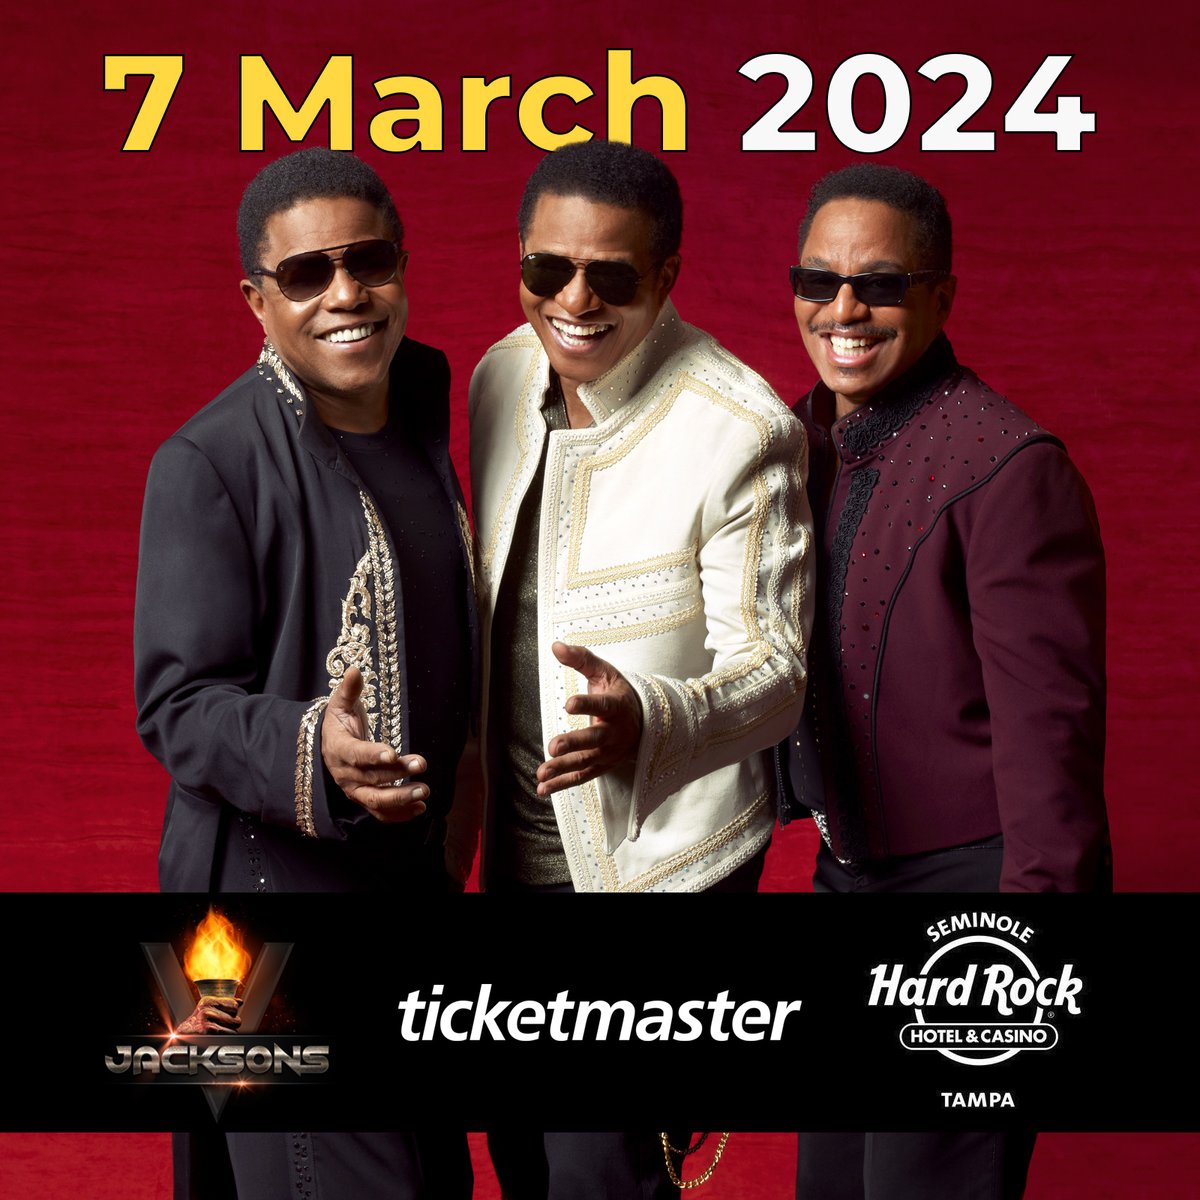 Get ready to groove and party with the @Jacksons at Seminole Hard Rock Hotel & Casino Tampa on March 7th as we bring the ultimate Jacksons Party to town! ticketmaster.com/the-jacksons-t…